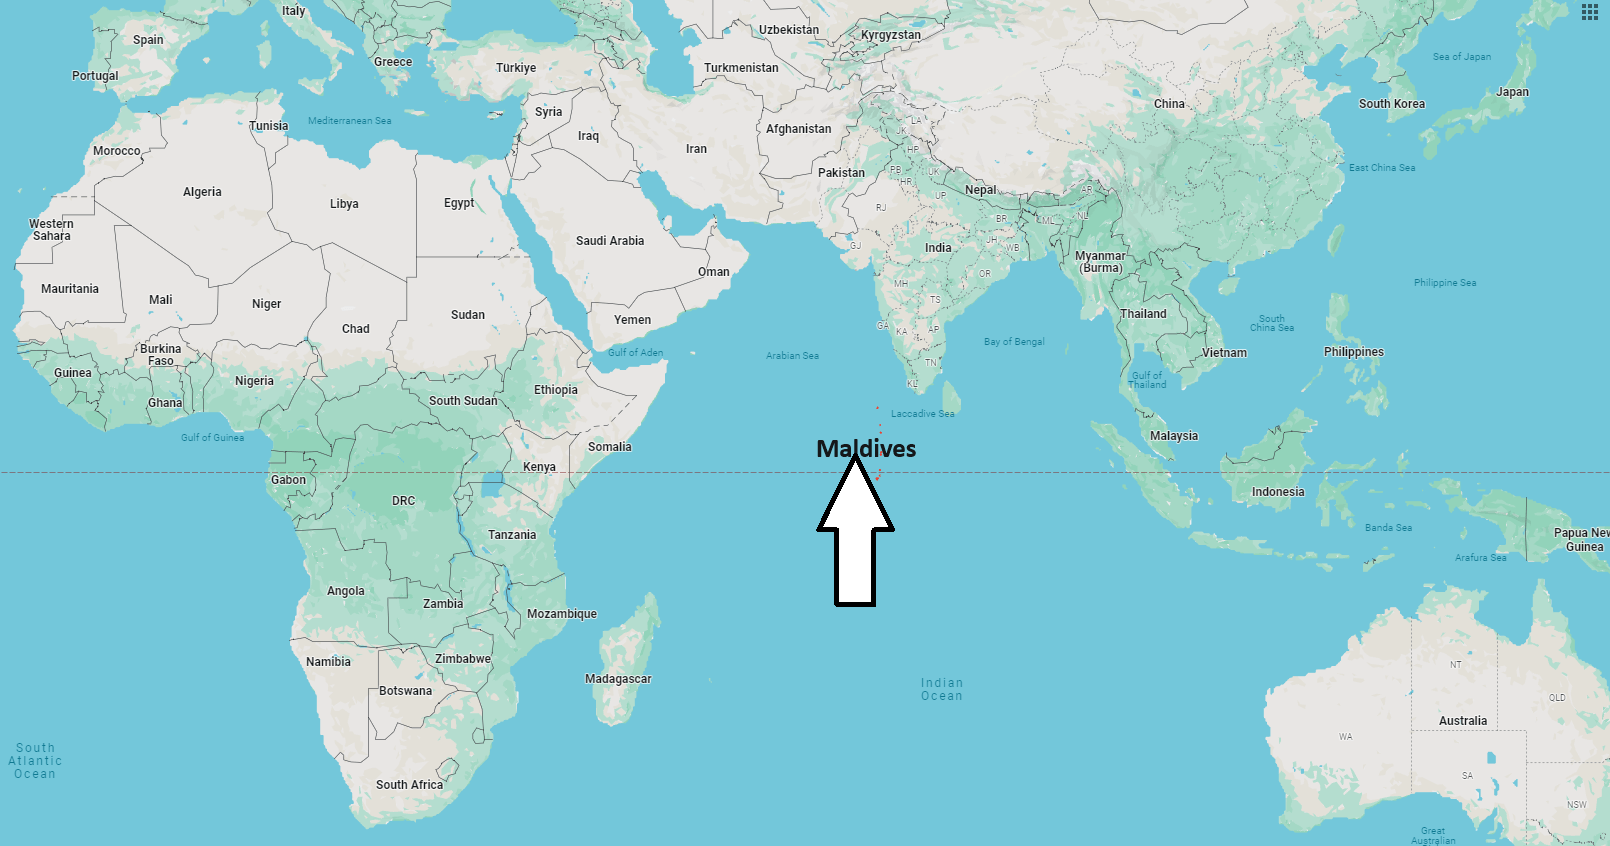 What Continent is Maldives in